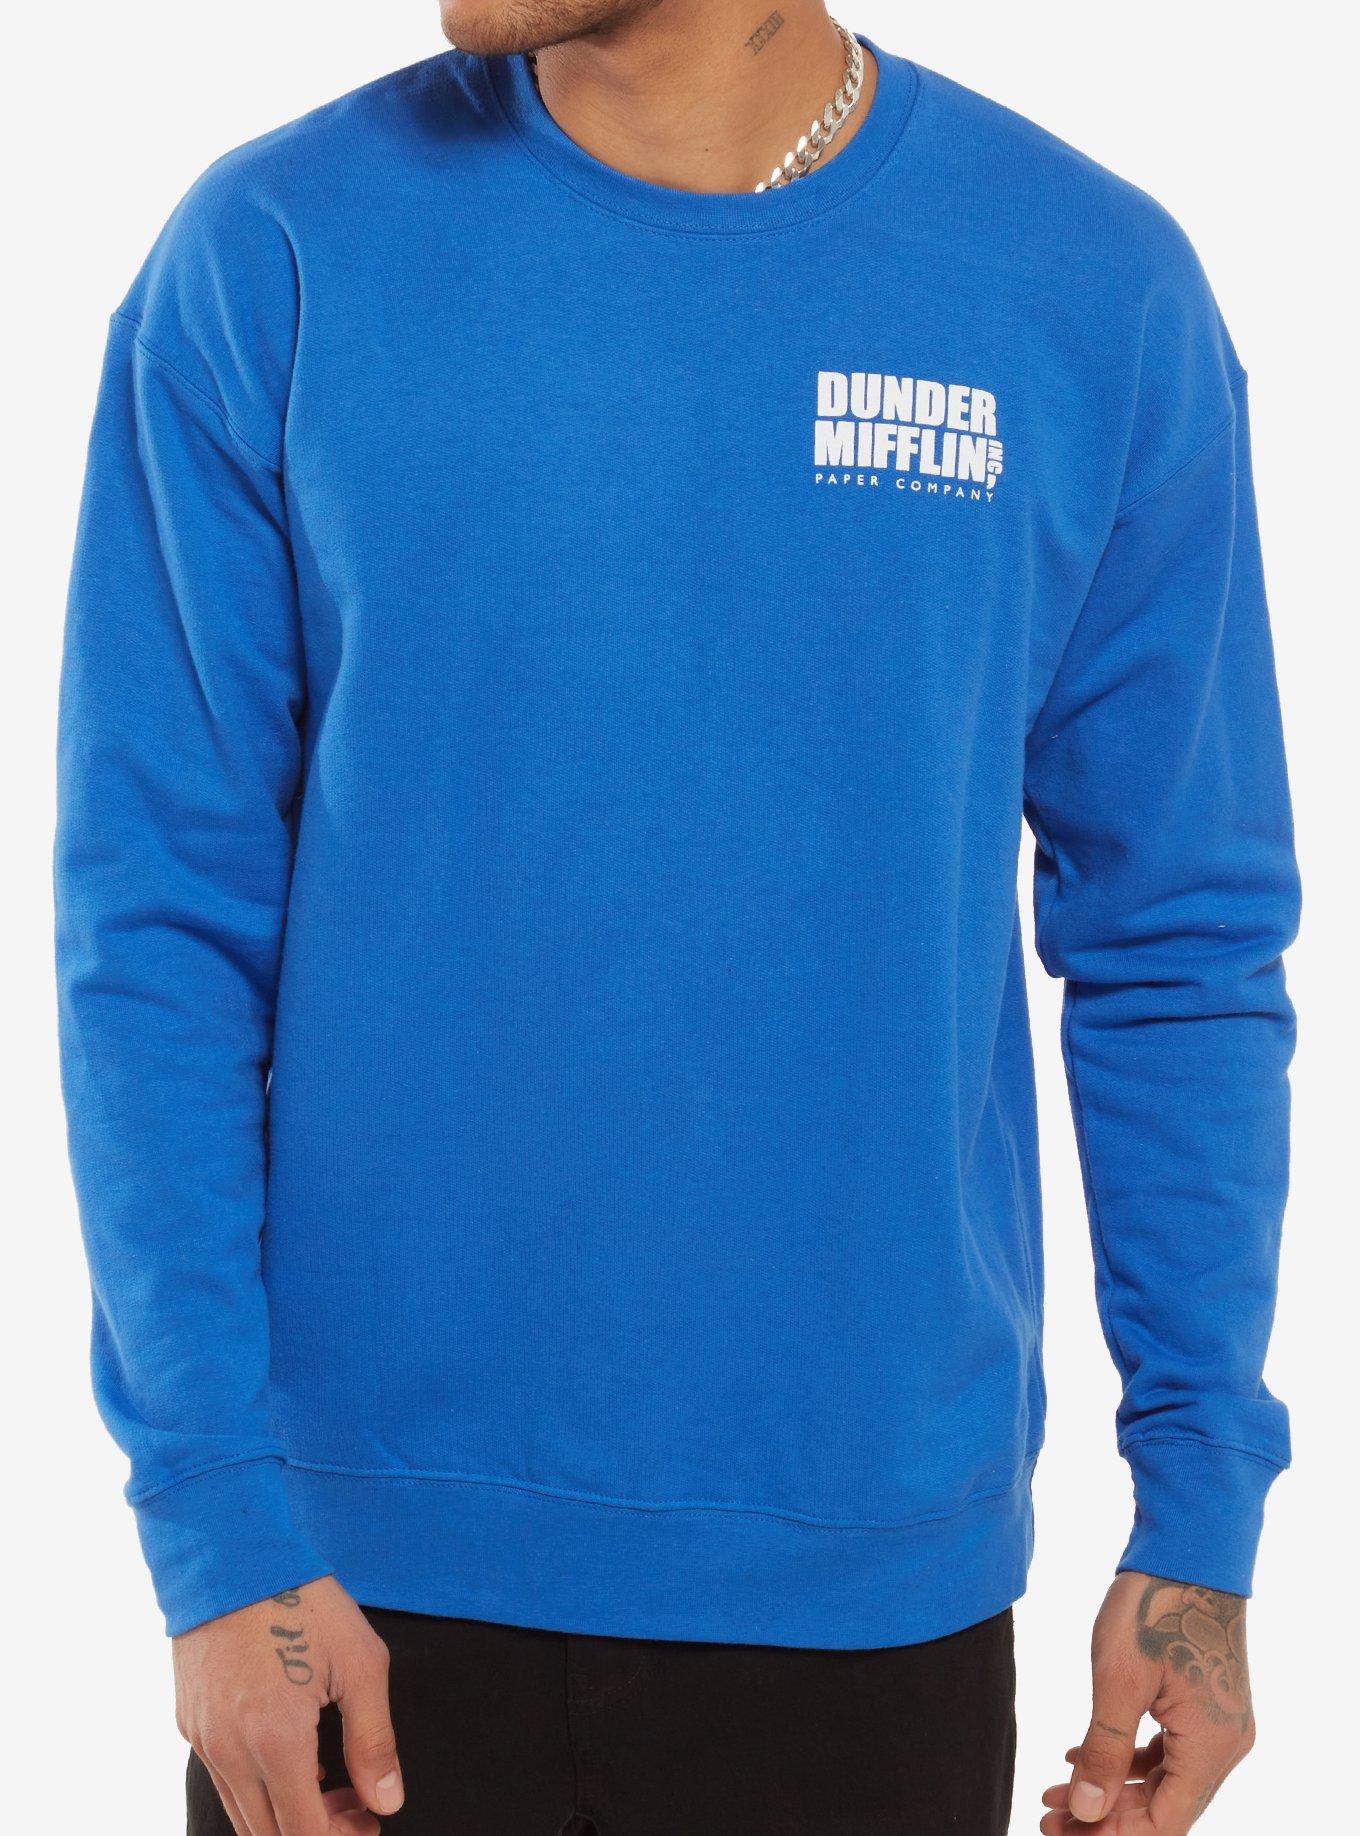 The Office Assistant Regional Manager Sweatshirt, BLUE, alternate